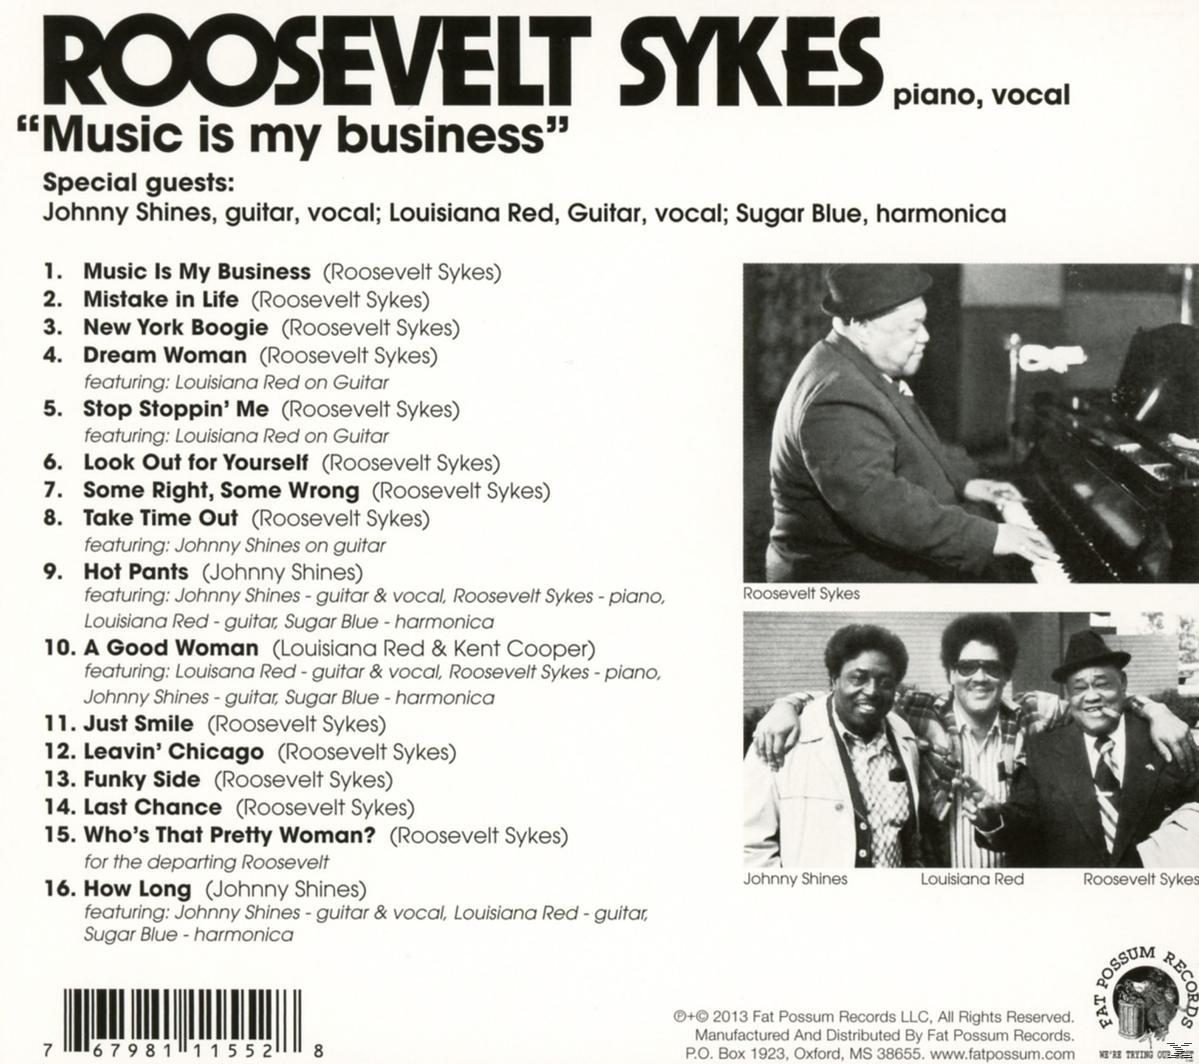 Roosevelt Sykes - Is Business - (CD) Music My